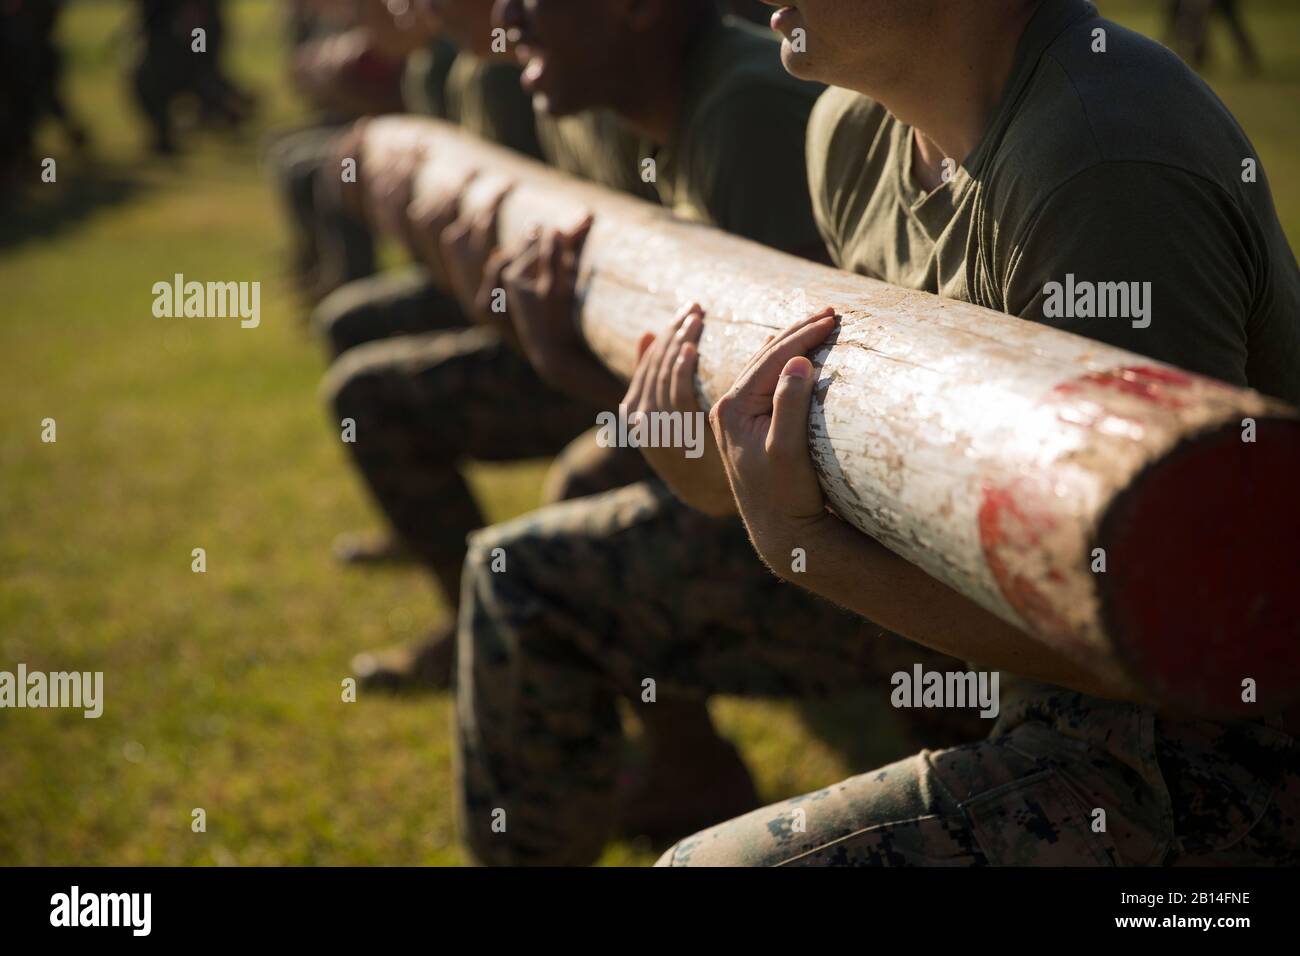 U.S. Marines with the Logistics Combat Element (LCE), Marine Rotational Force – Darwin (MRF-D), conduct log lunges during a field meet at Robertson Barracks, Darwin, Australia, July 22, 2019. The LCE Marines held the field meet to conduct physical training while providing the opportunity to build comradery through competition. (U.S. Marine Corps photo by Staff Sgt. Jordan E. Gilbert) Stock Photo